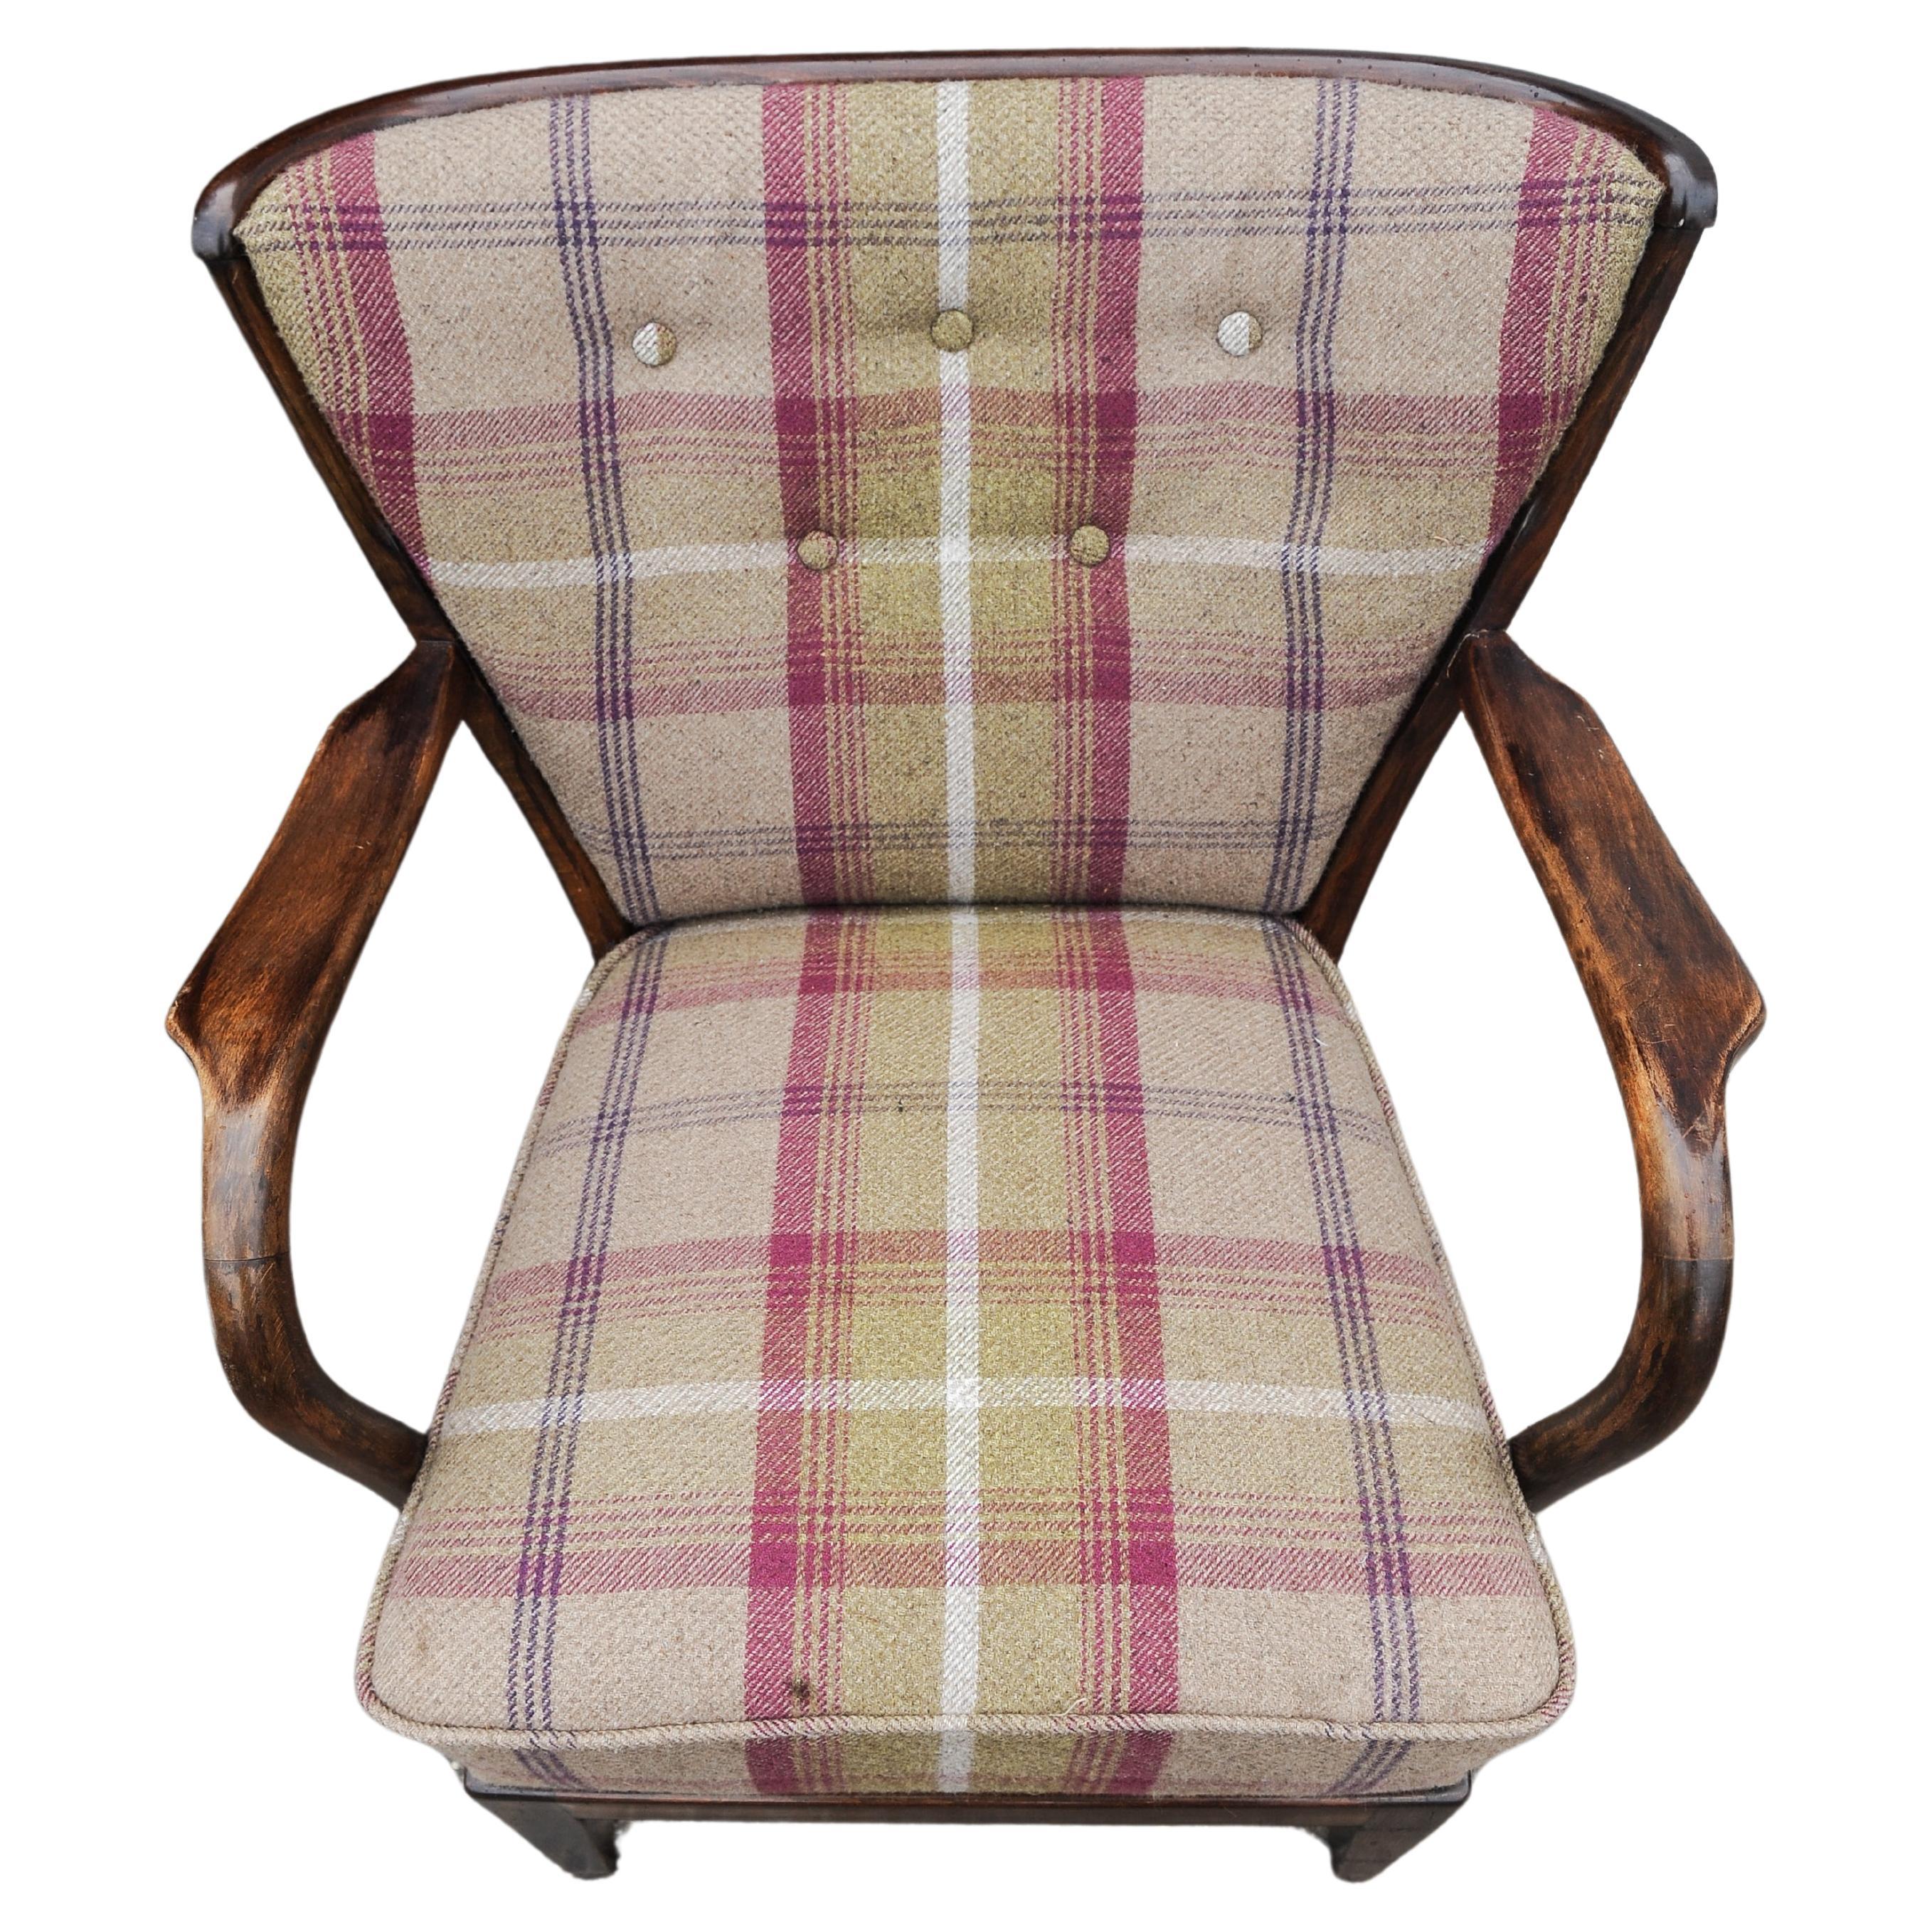 Mid-Century Modern 1940's Fritz Hansen Art Deco Oak Bentwood Armchair with Wool Plaid Upholstery  For Sale